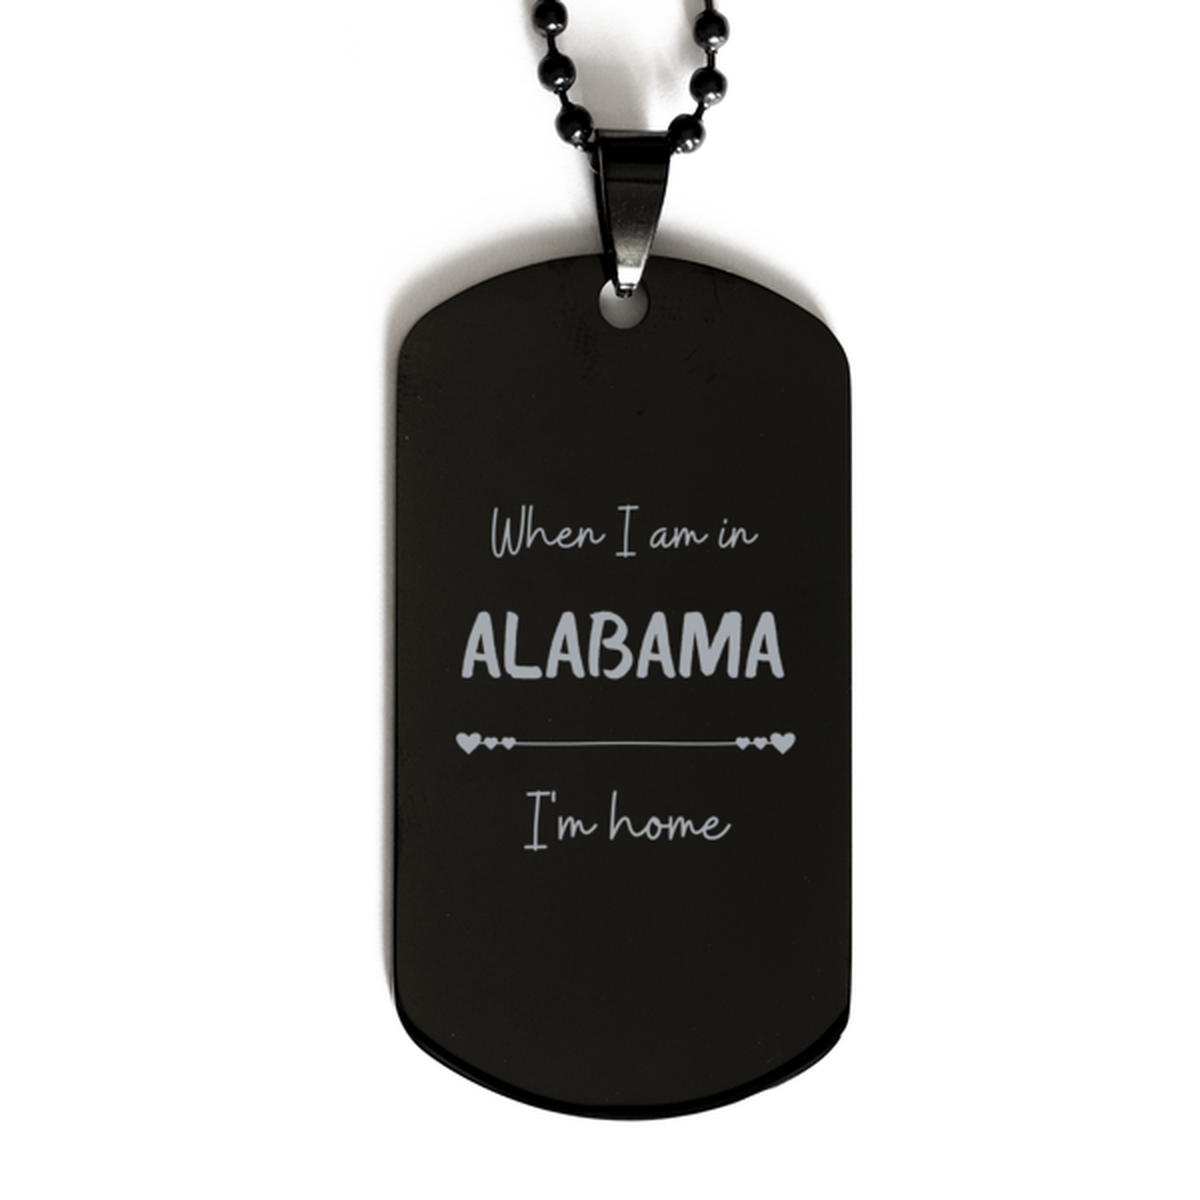 When I am in Alabama I'm home Black Dog Tag, Cheap Gifts For Alabama, State Alabama Birthday Gifts for Friends Coworker